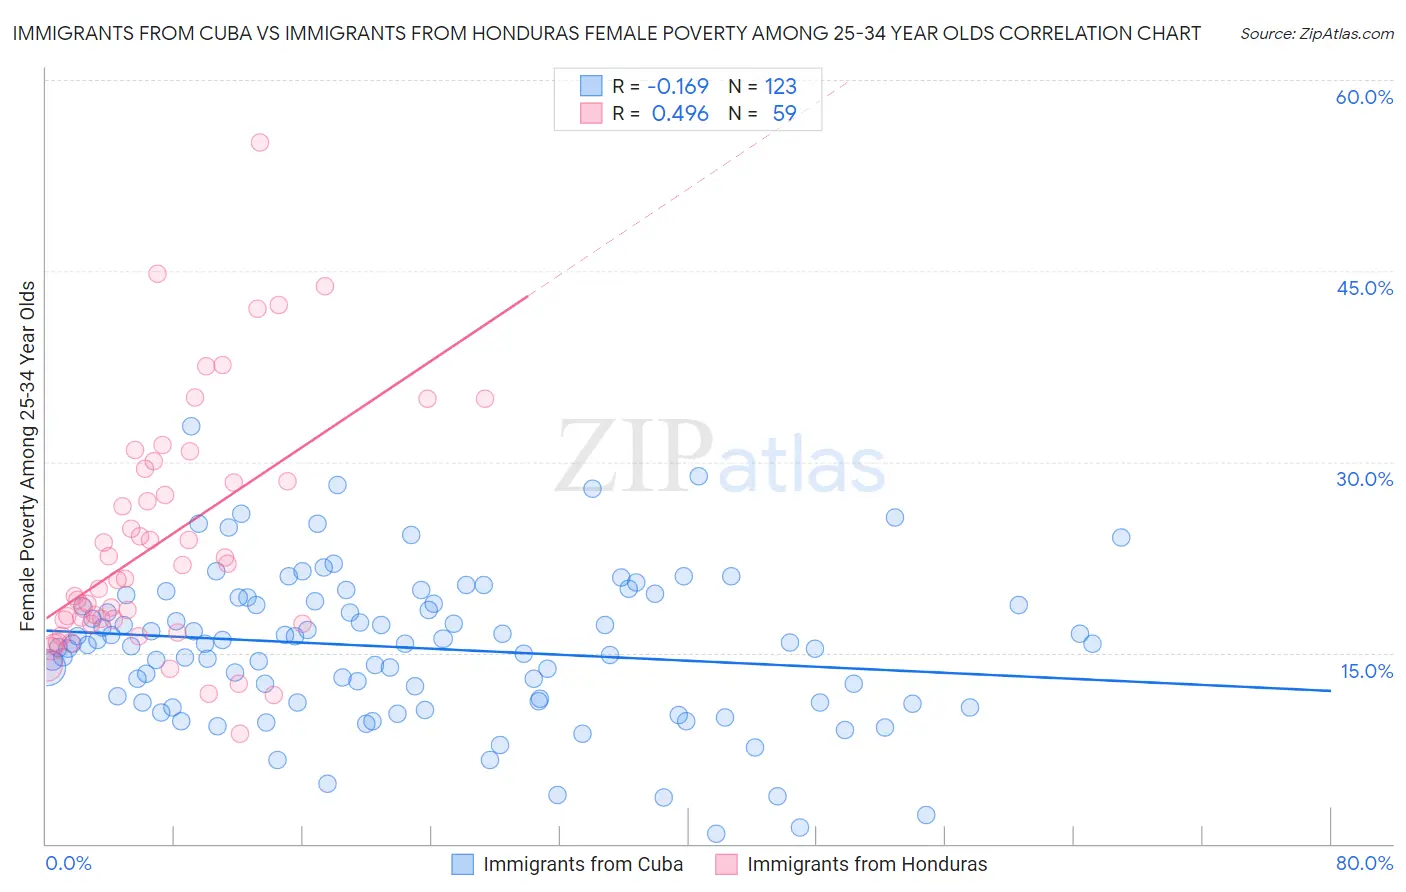 Immigrants from Cuba vs Immigrants from Honduras Female Poverty Among 25-34 Year Olds